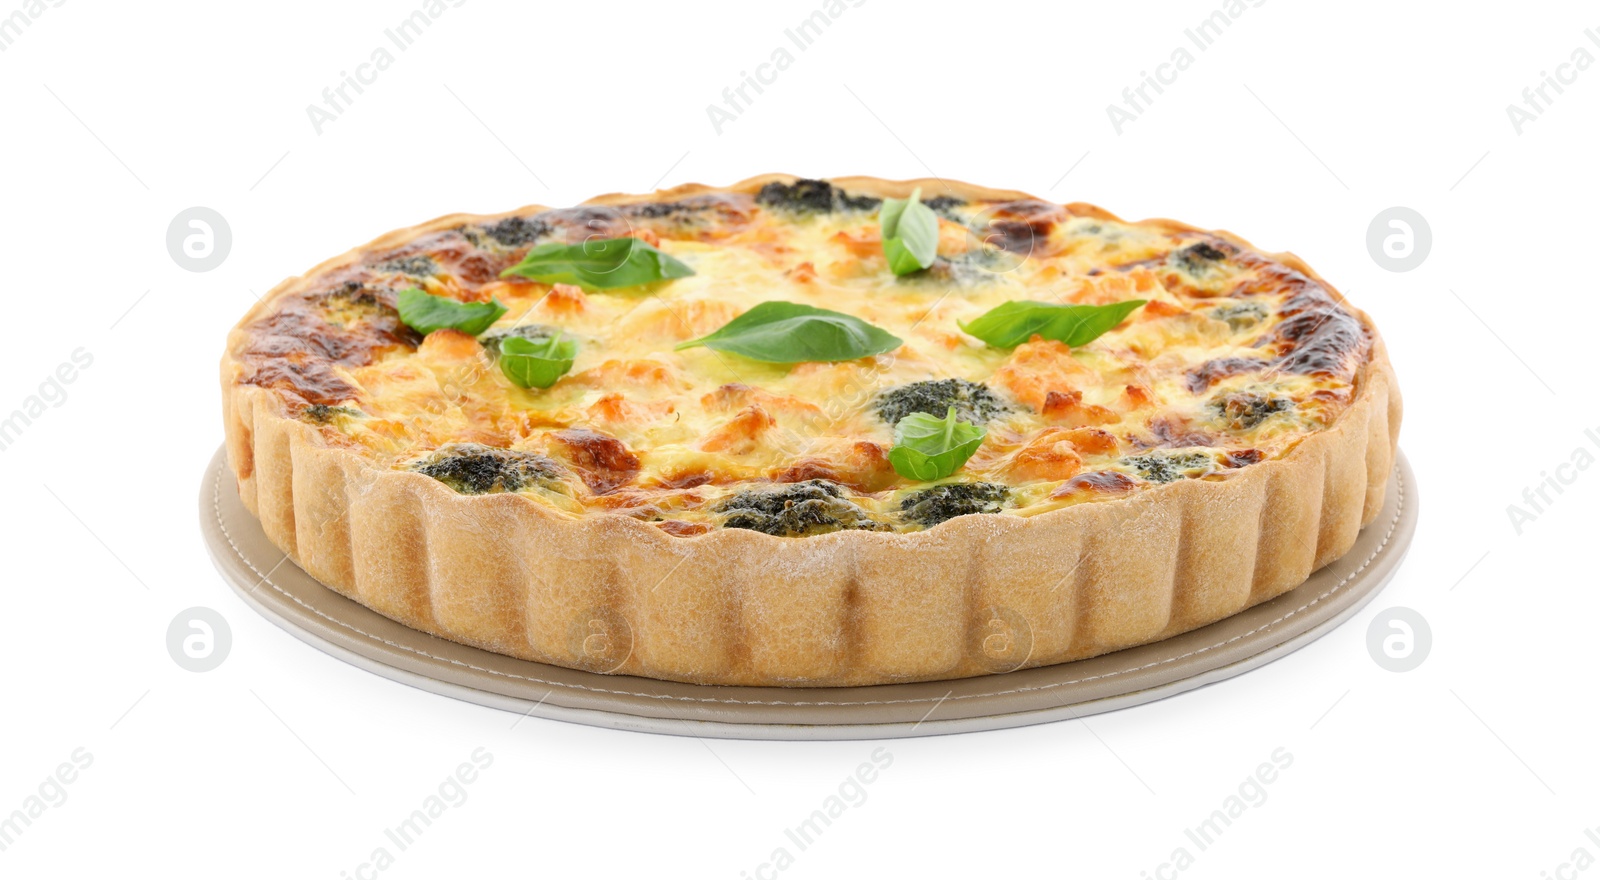 Photo of Delicious homemade quiche with salmon, broccoli and basil leaves isolated on white